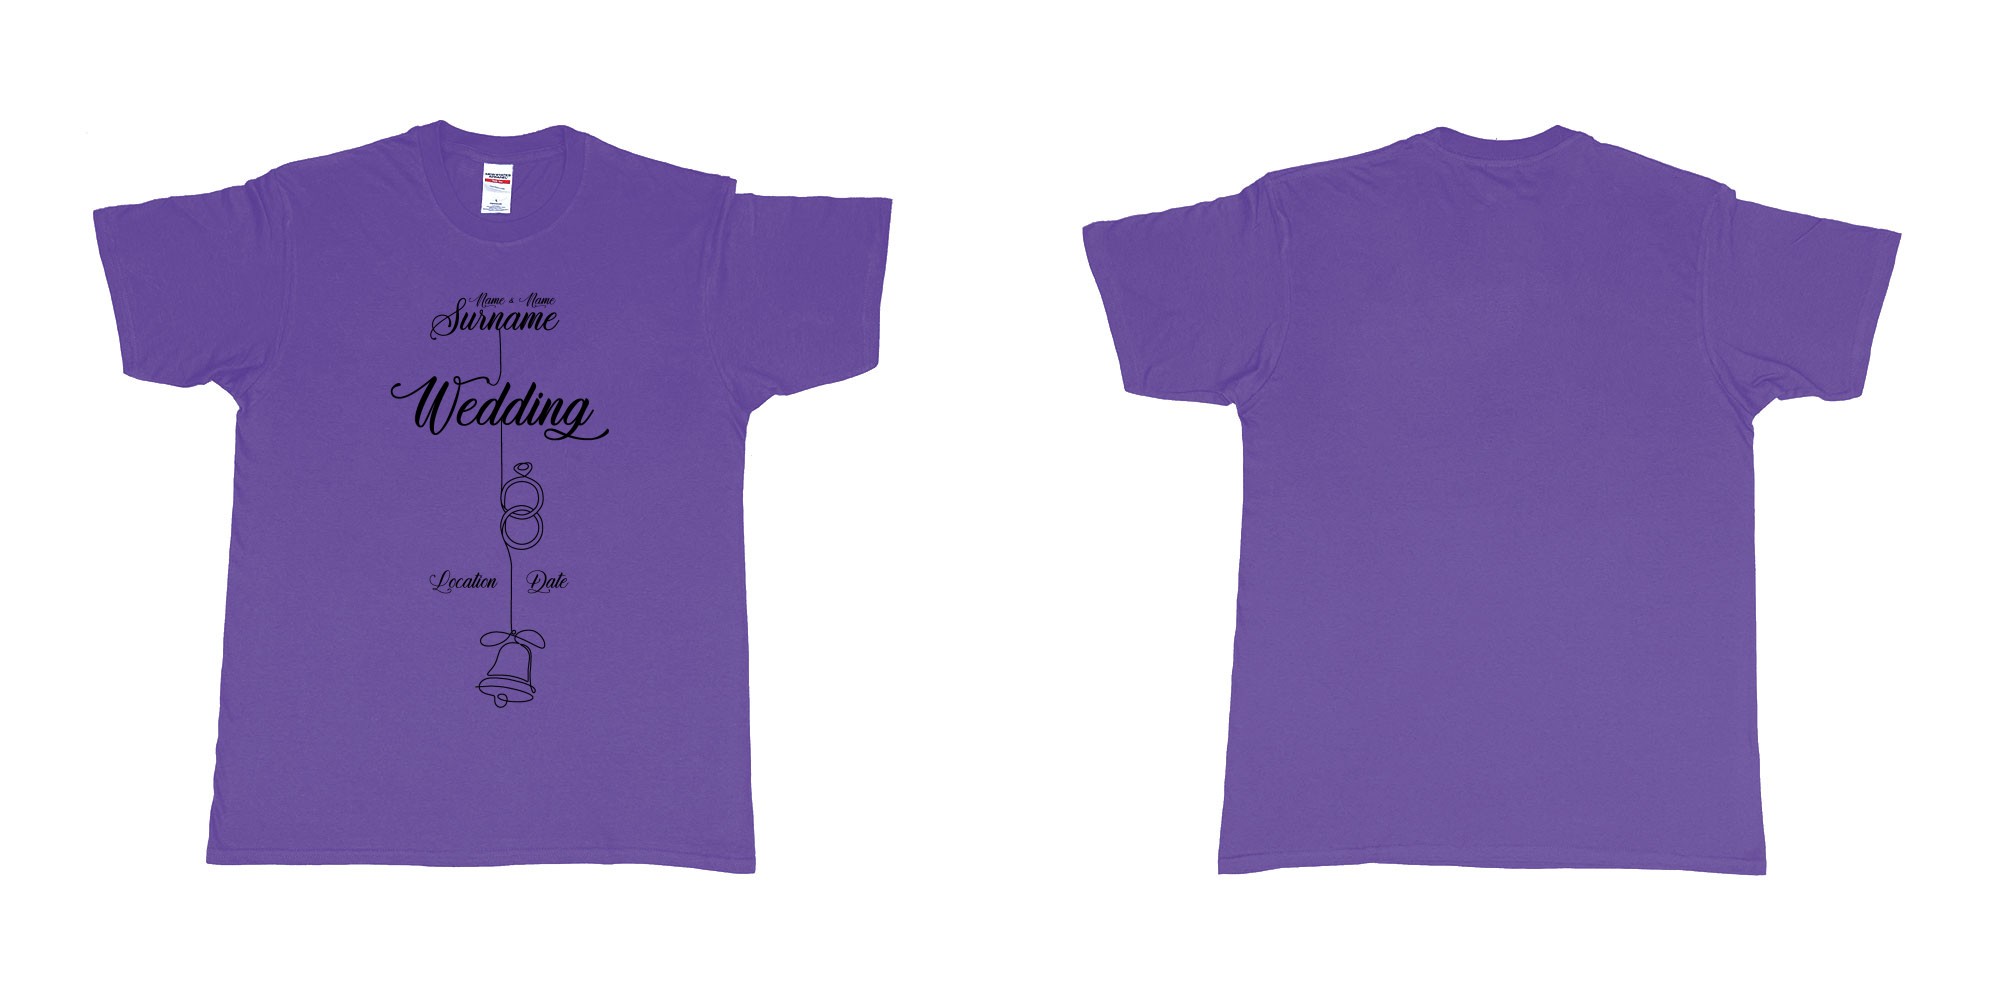 Custom tshirt design wedding string rings bell in fabric color purple choice your own text made in Bali by The Pirate Way